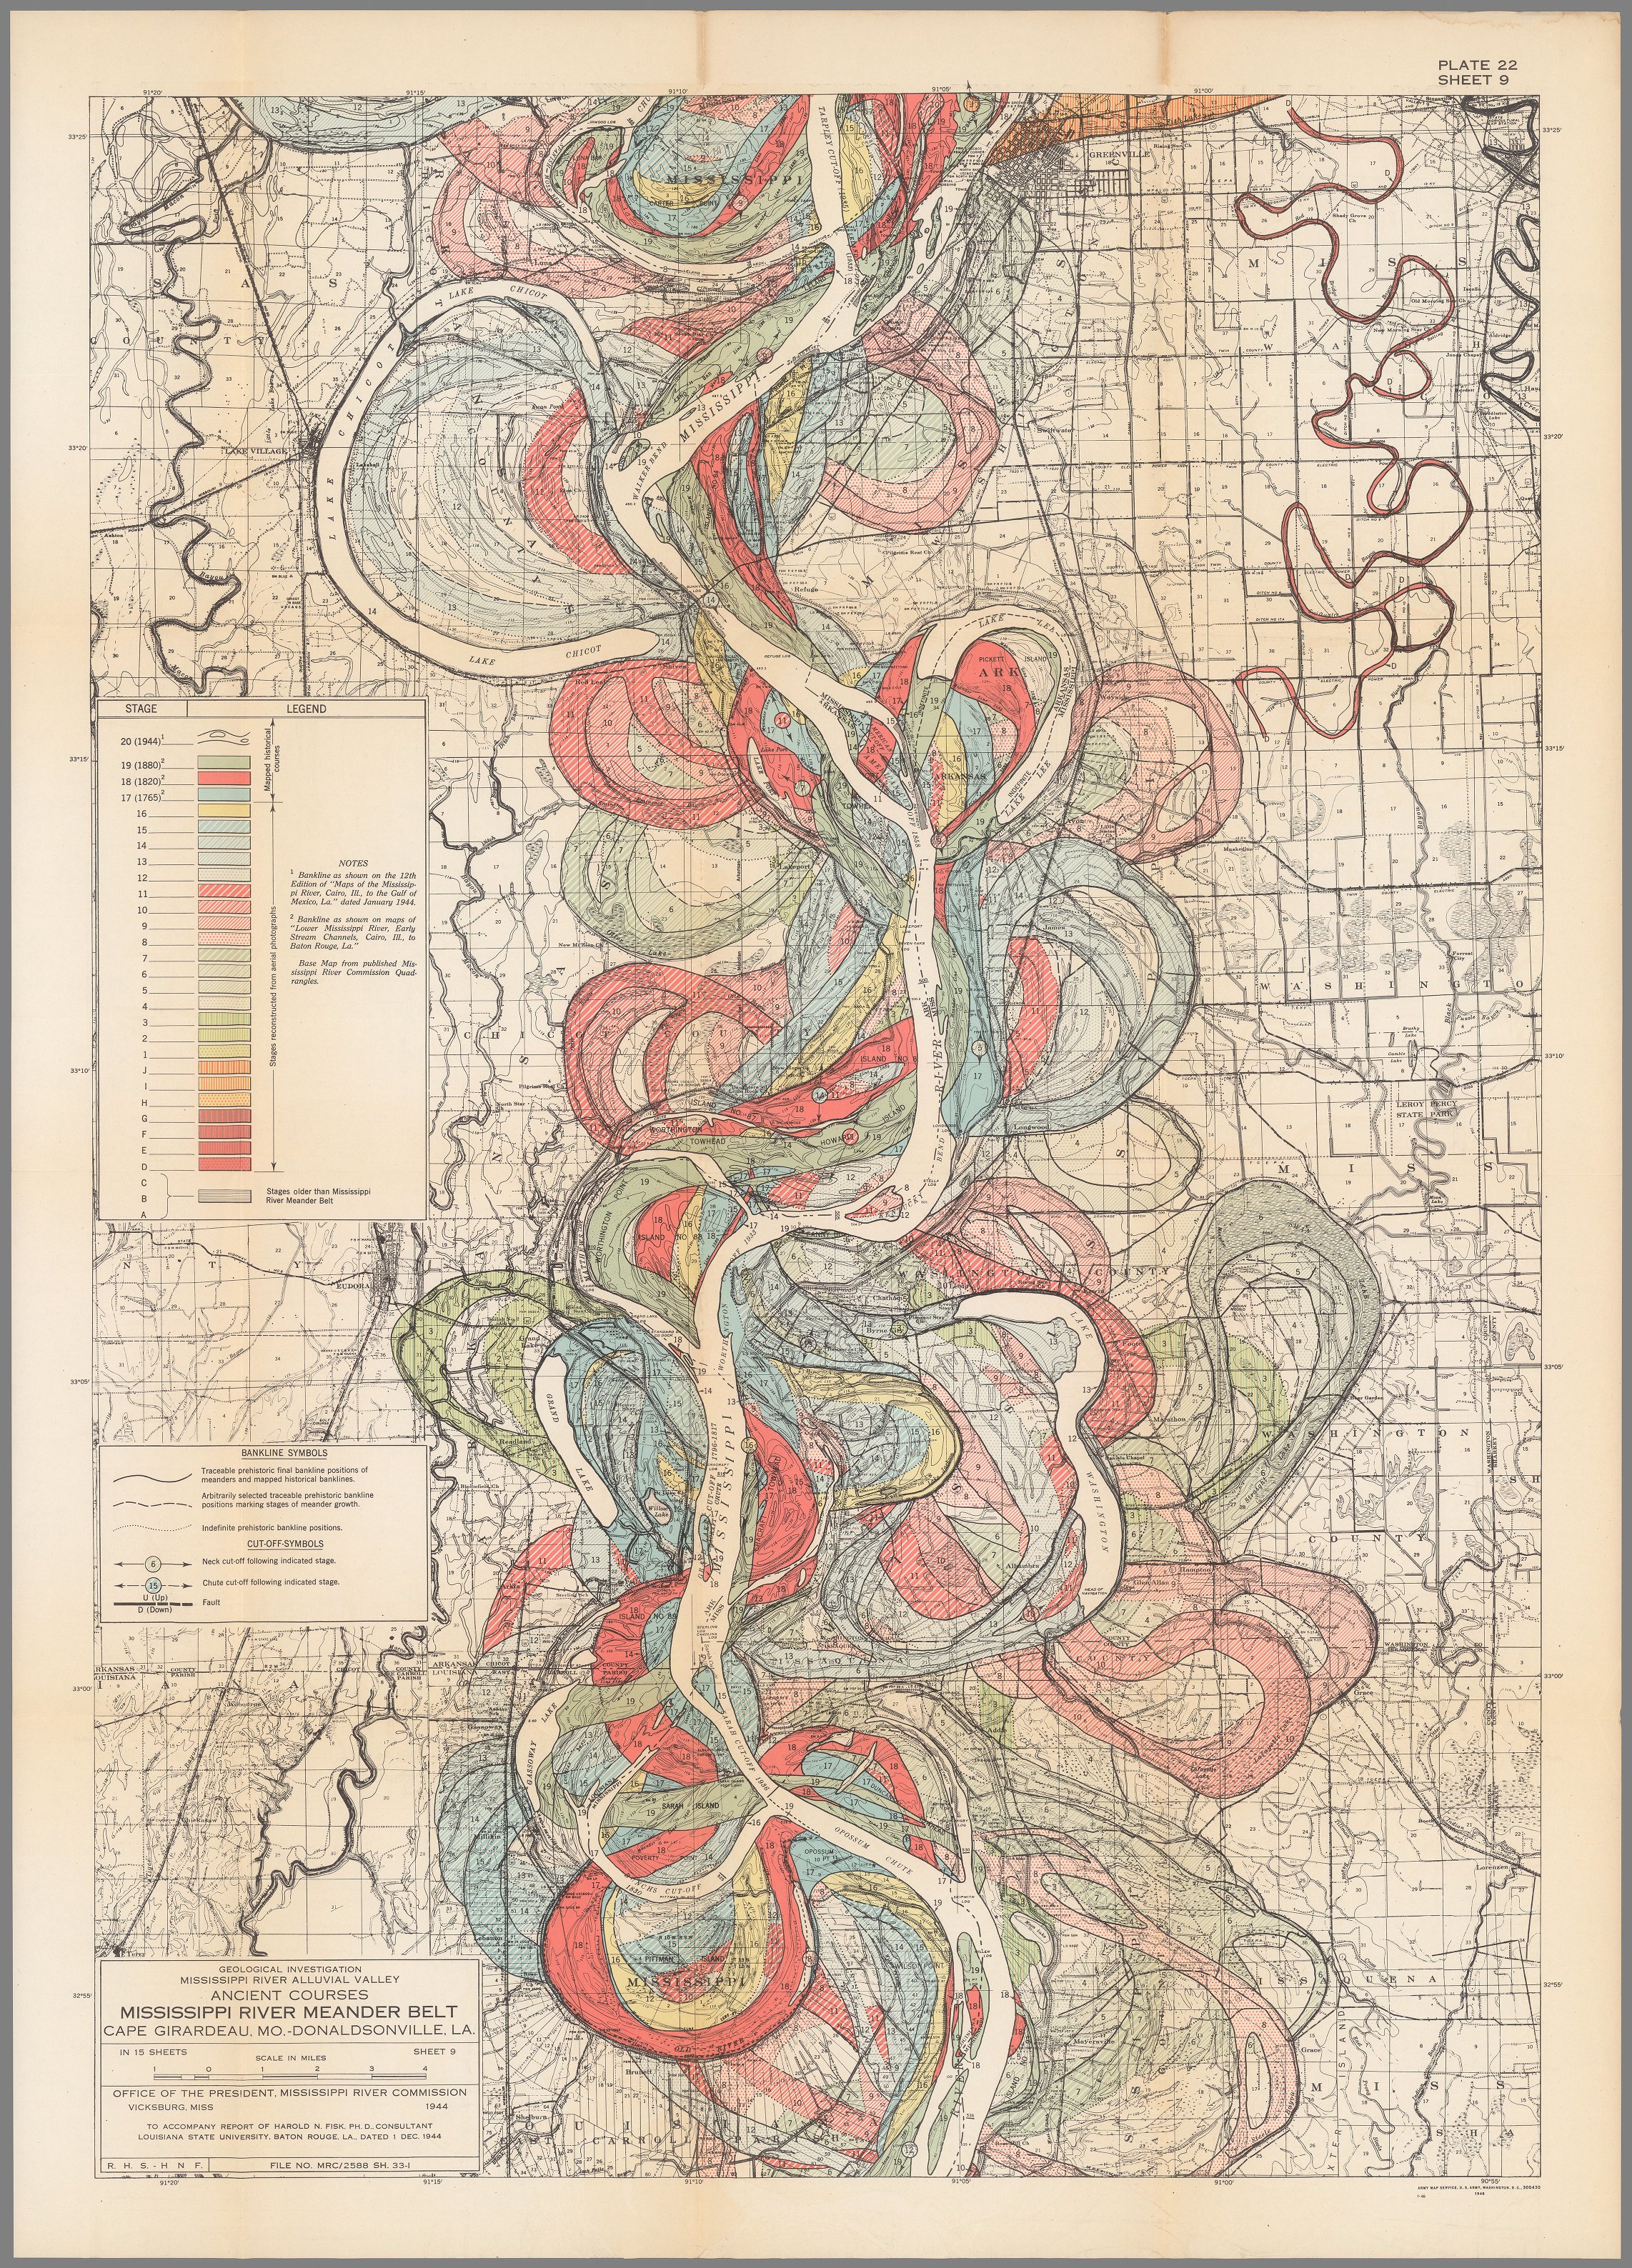 Geological Investigation of the Alluvial Valley of the Lower Mississippi River, plate 22